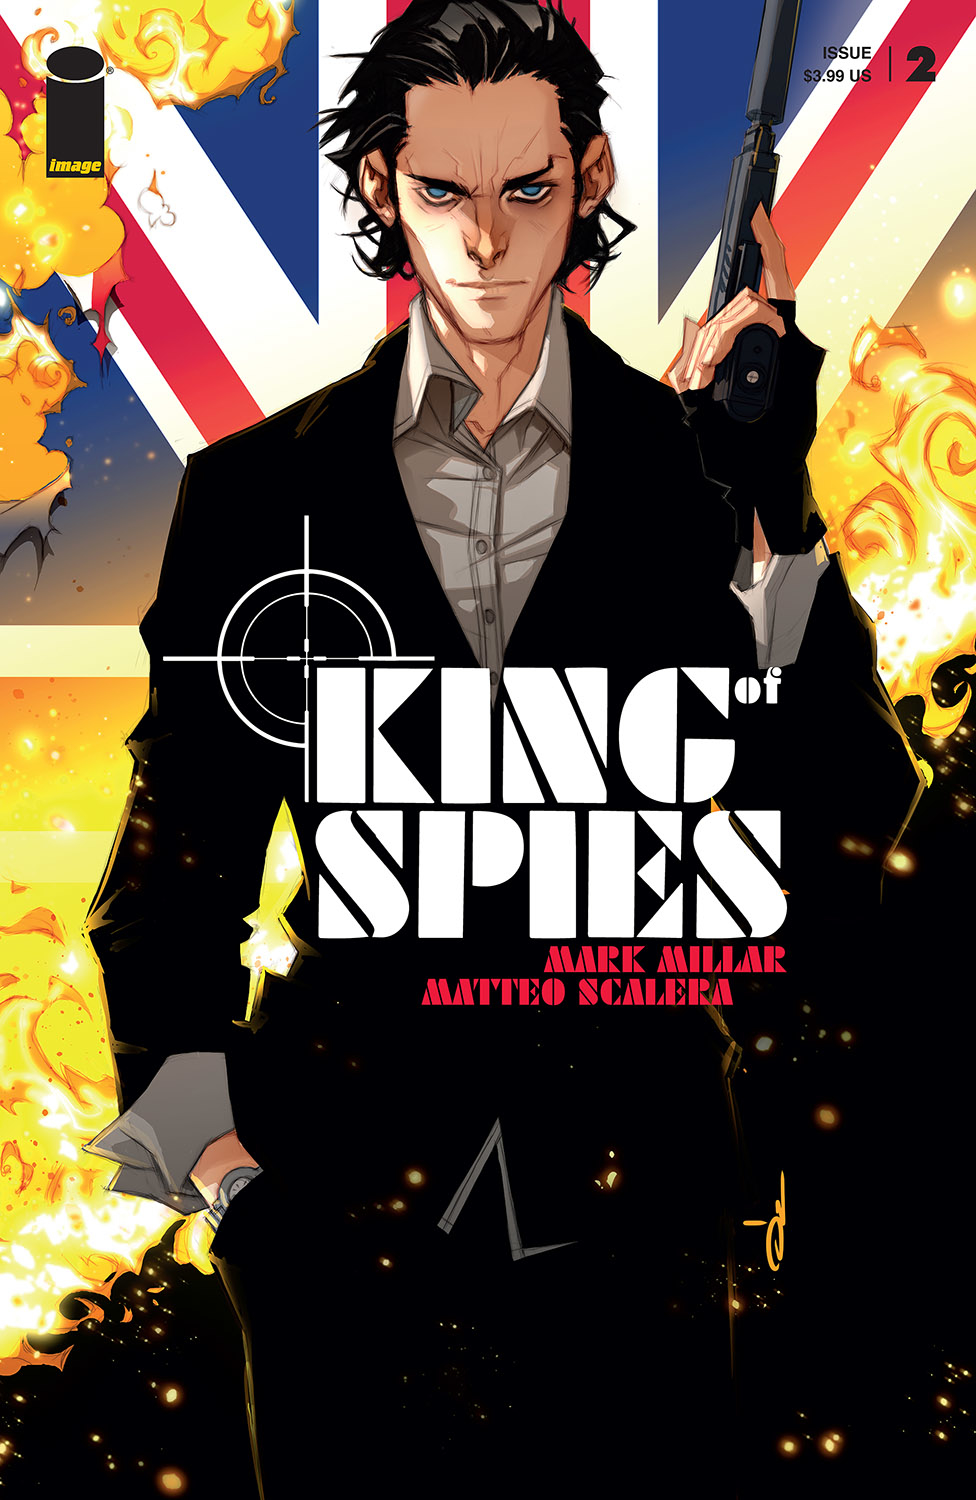 King of Spies #2 Cover C Yildirim (Mature) (Of 4)